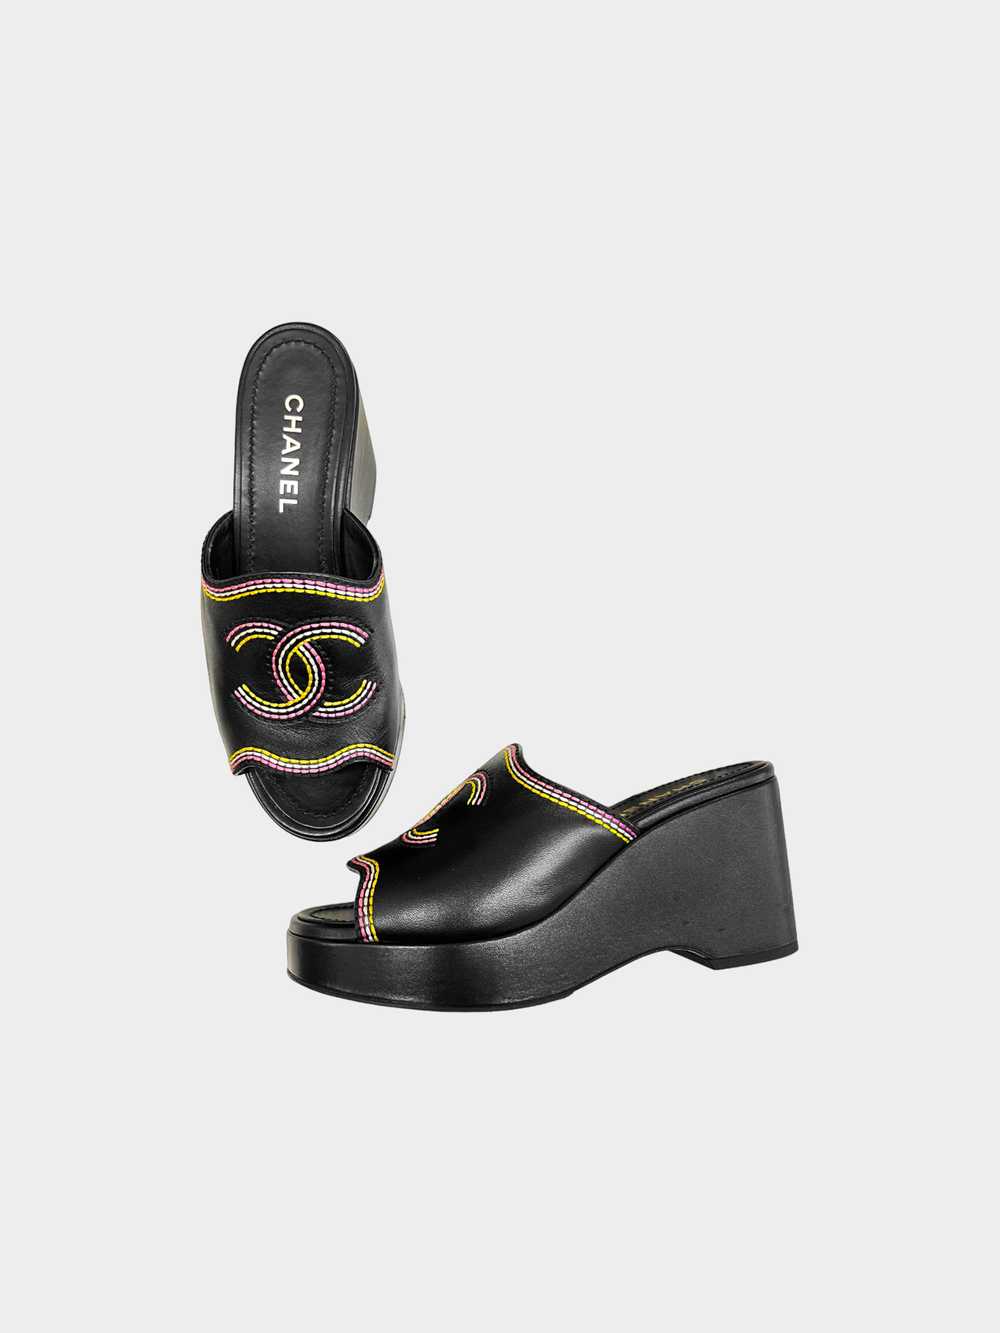 Chanel 2021 Multicolor Stitched CC Wedge Mules - image 2